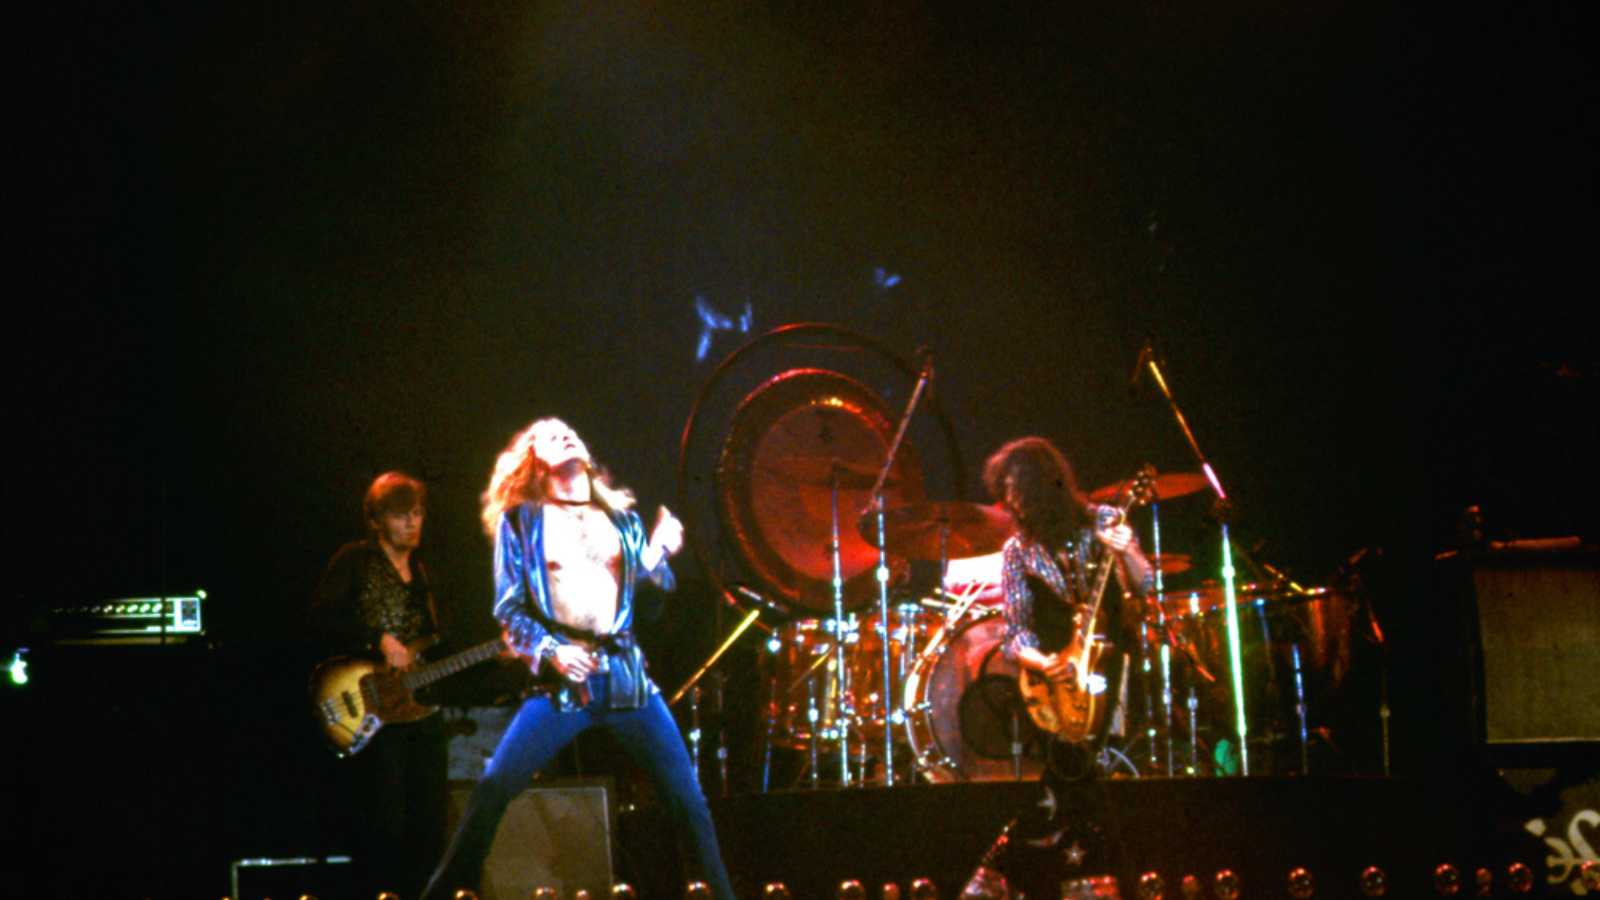 Uniondale, NY/USA - February 13, 1975: Legendary rock band Led Zeppelin perform at Nassau Coliseum on their 1975 North American tour.